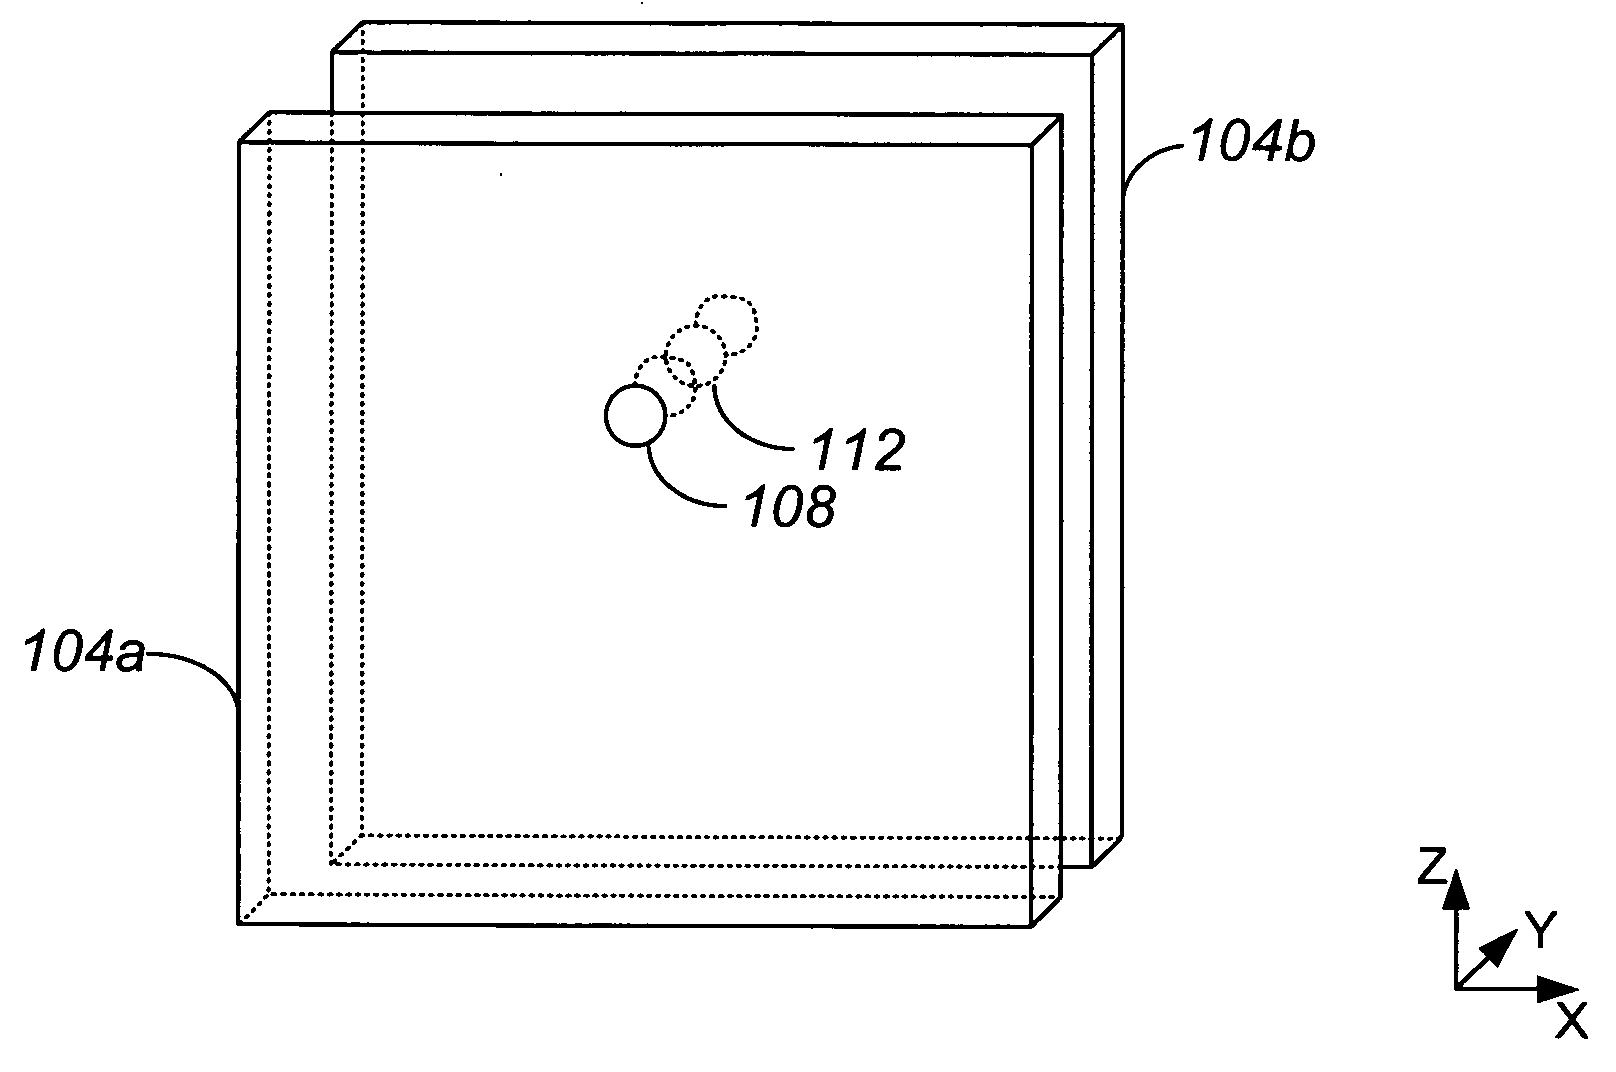 Providing airflow to an electronics enclosure while providing protection and shielding against electromagnetic interference